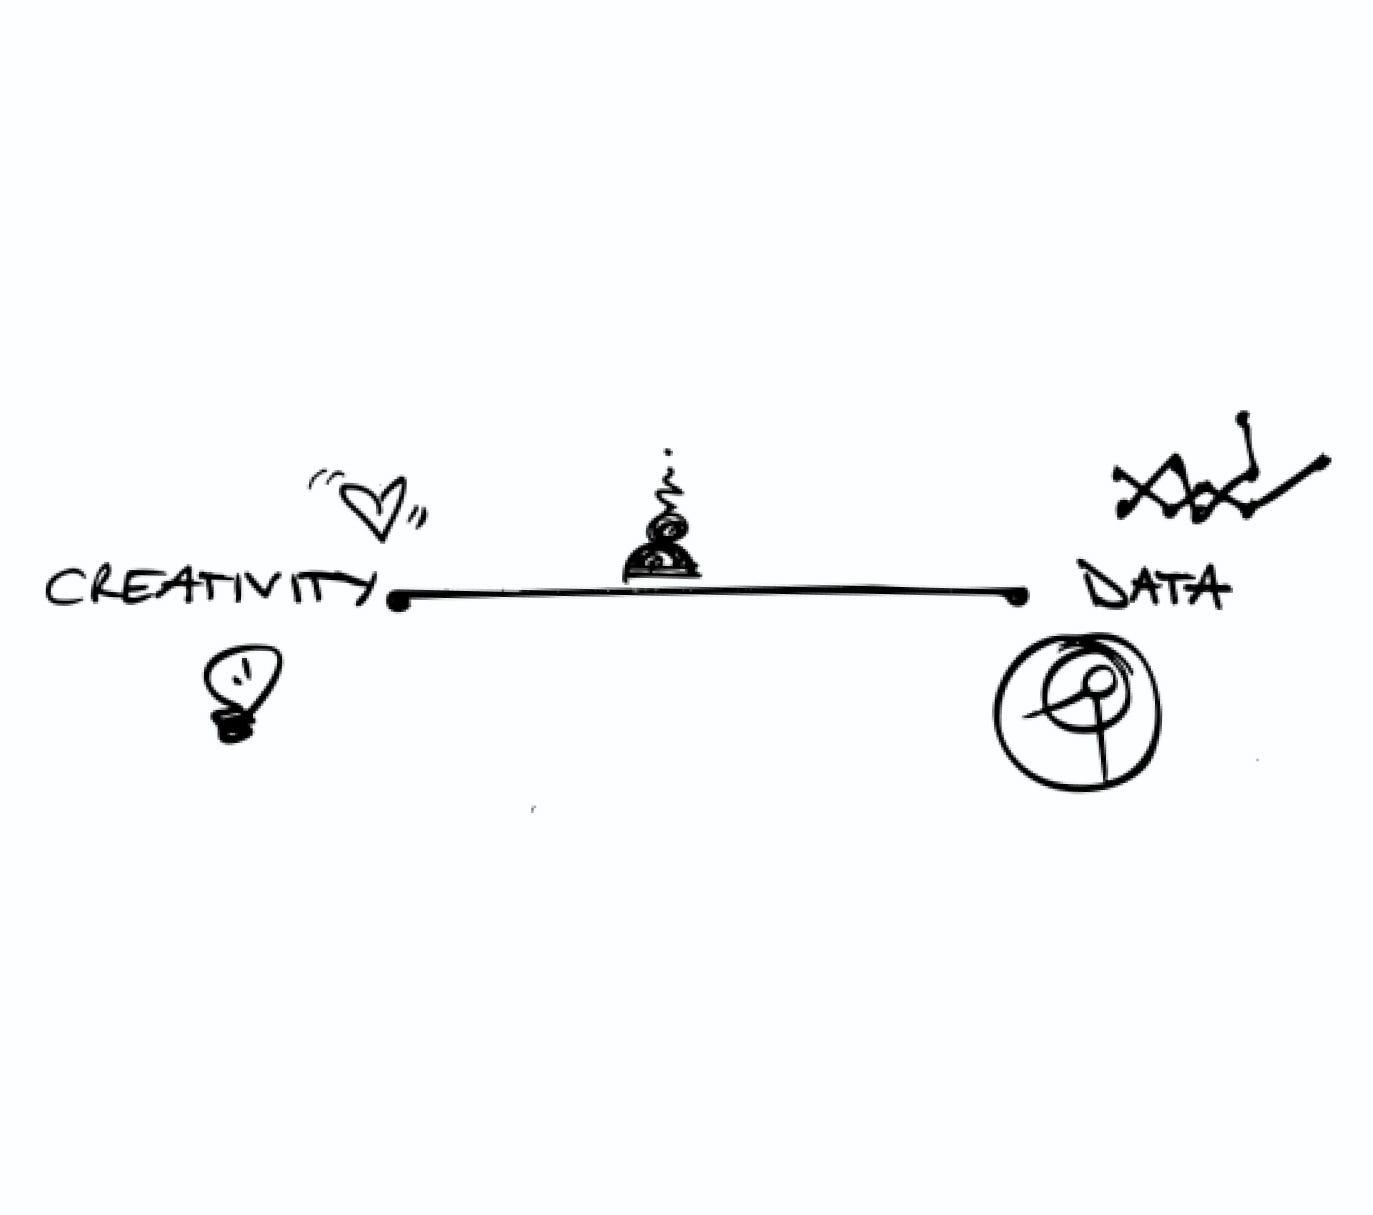 An illustration of a line with creativity and data at each end.